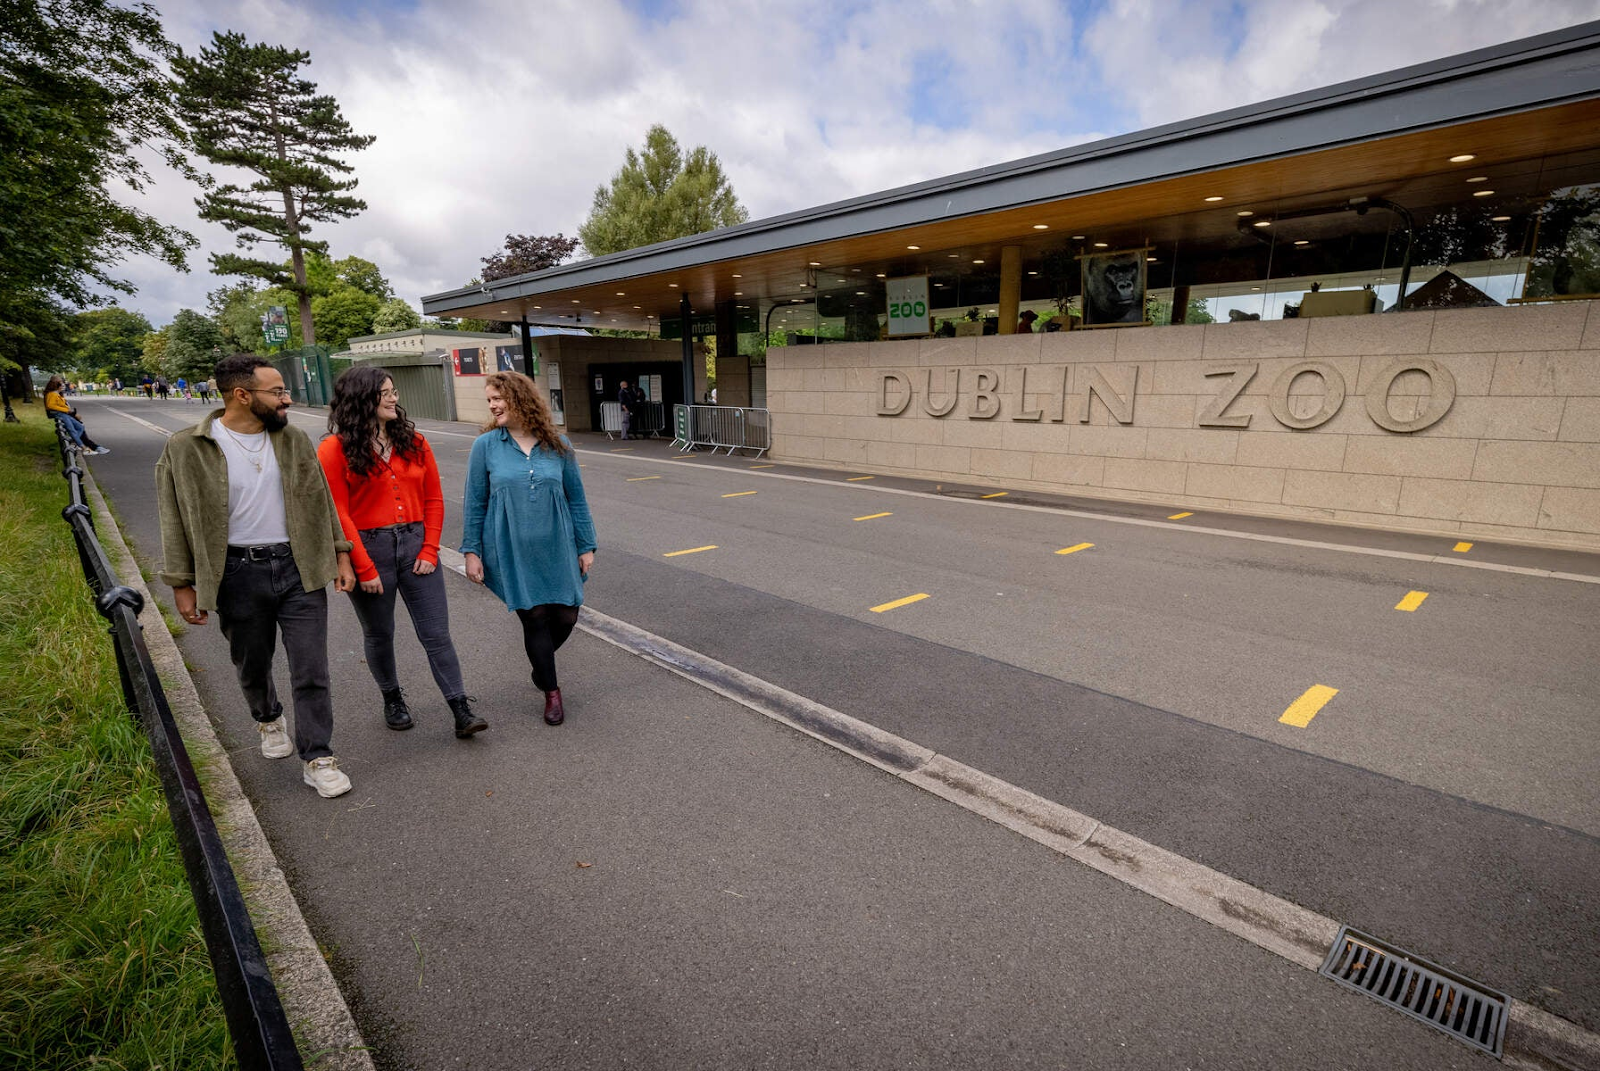 What is Dublin Zoo most known for